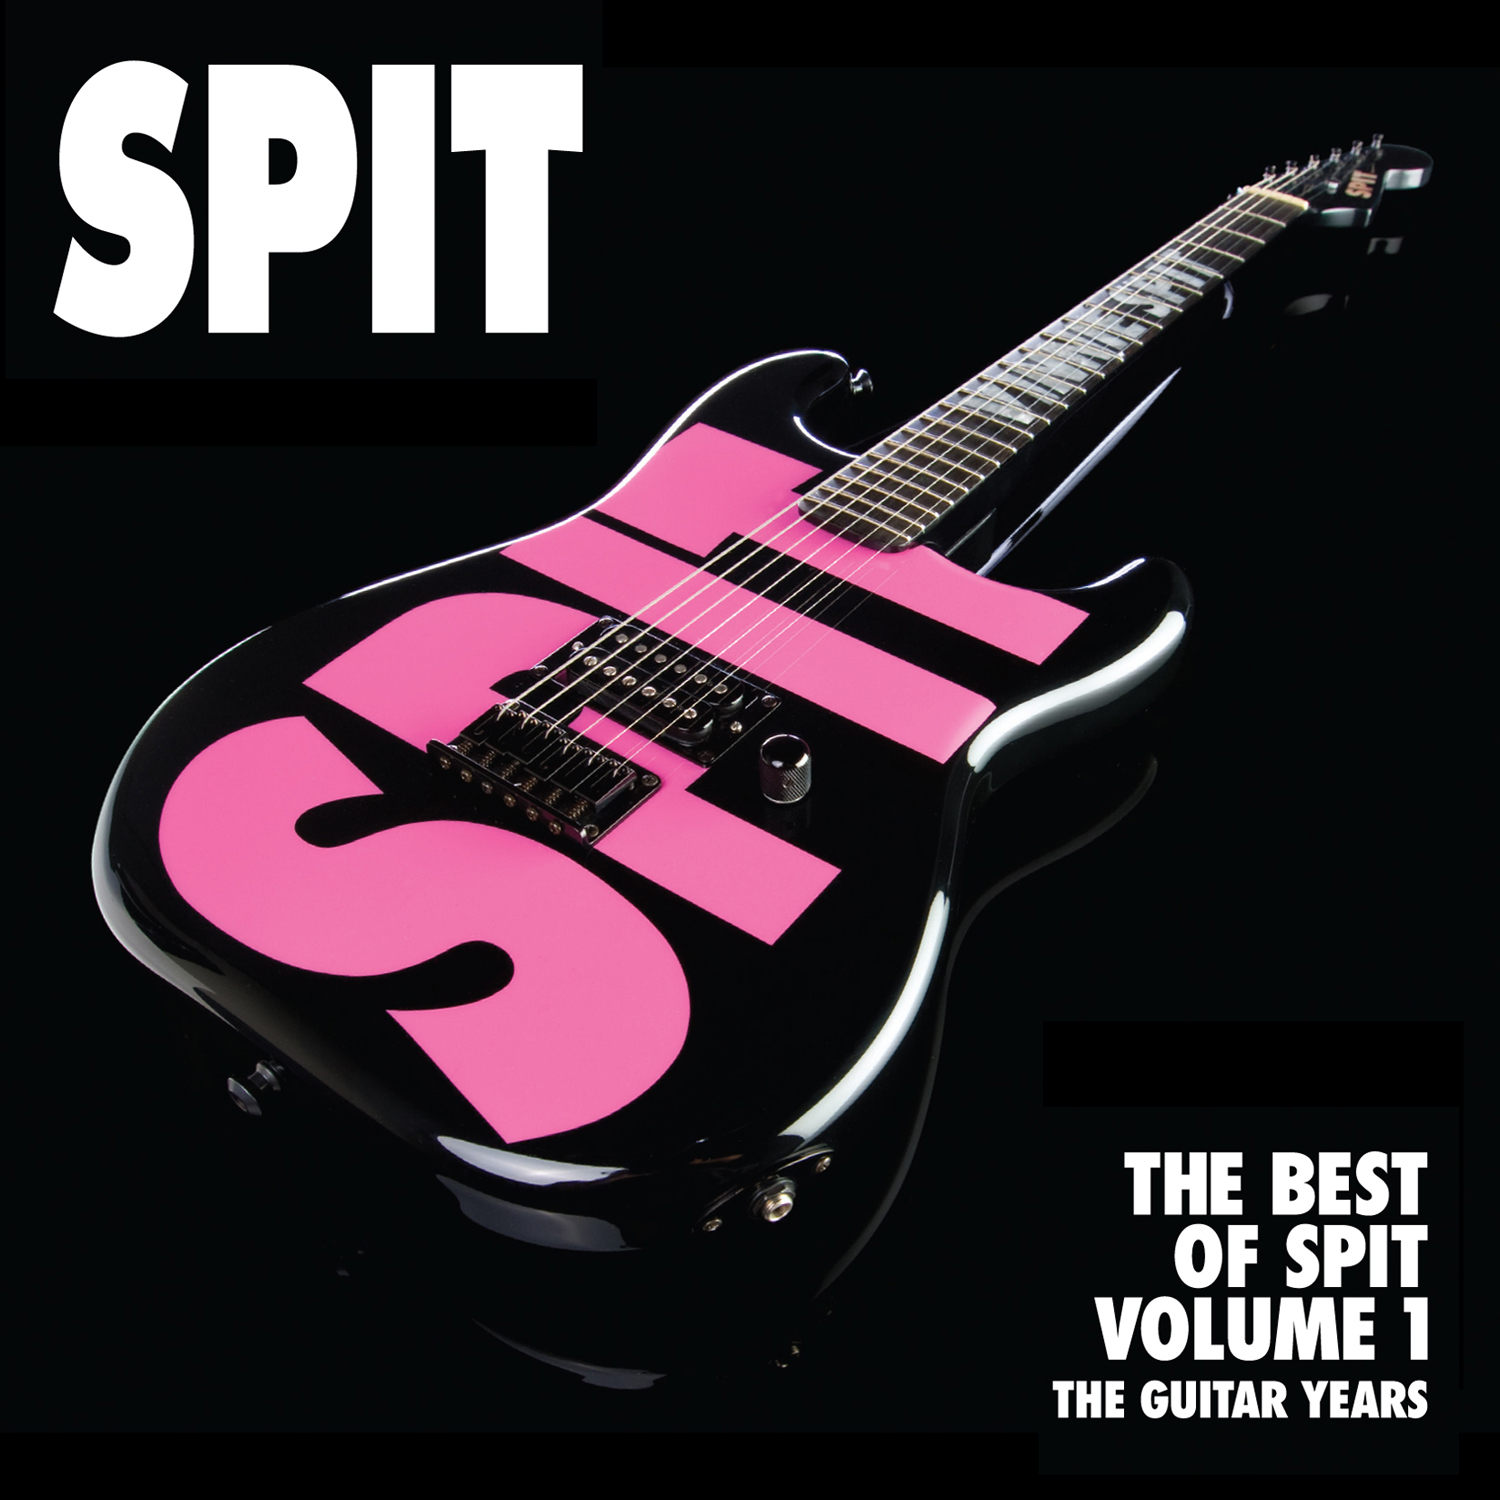 The Best of Spit: Vol 1, The Guitar Years